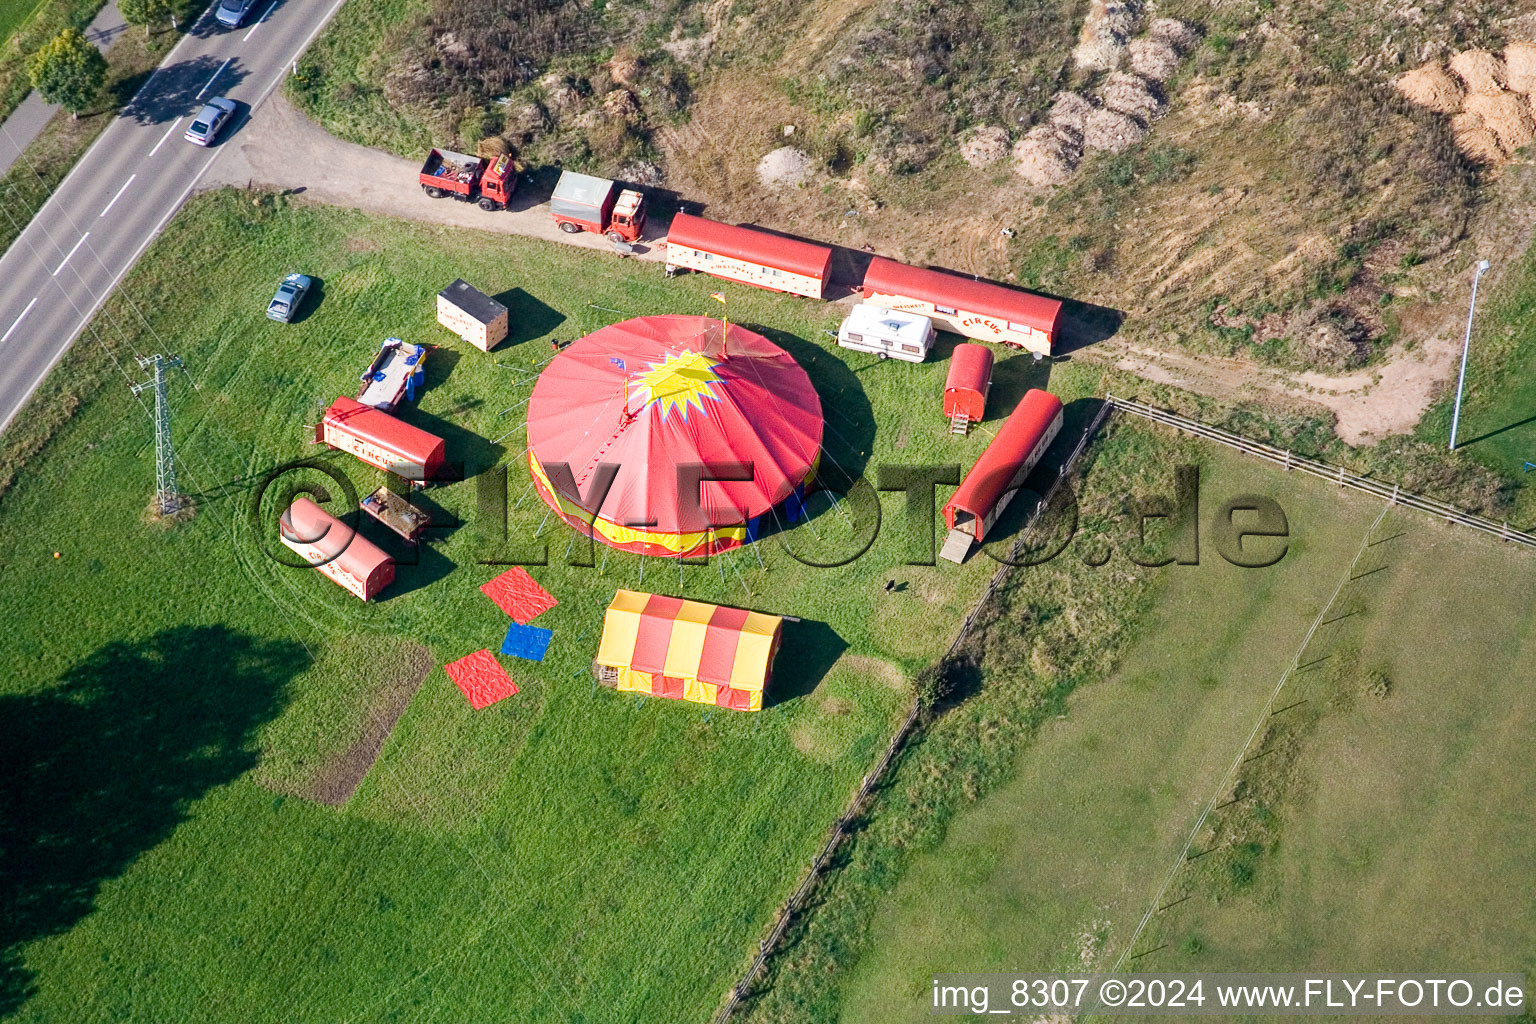 Circus tent domes of a circus in the district Minderslachen in Kandel in the state Rhineland-Palatinate, Germany